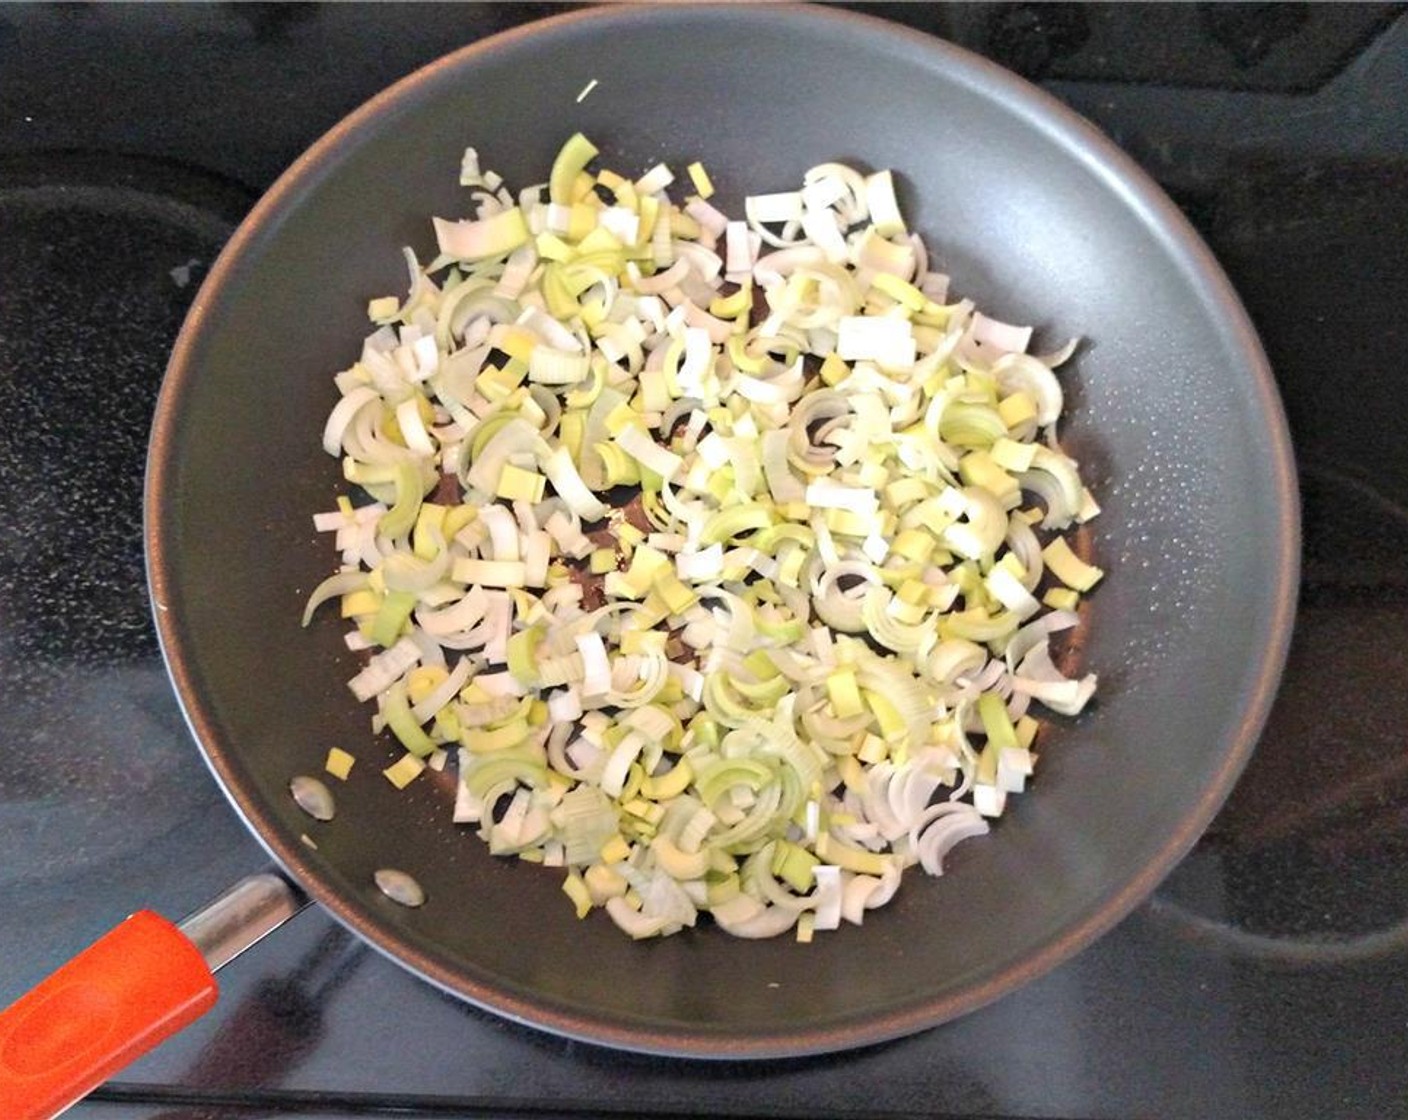 step 3 Warm Olive Oil (1 Tbsp) in a oven-safe saucepan and, once warm, saute leeks in oil for 2 to 3 minutes over medium heat until they get some color.